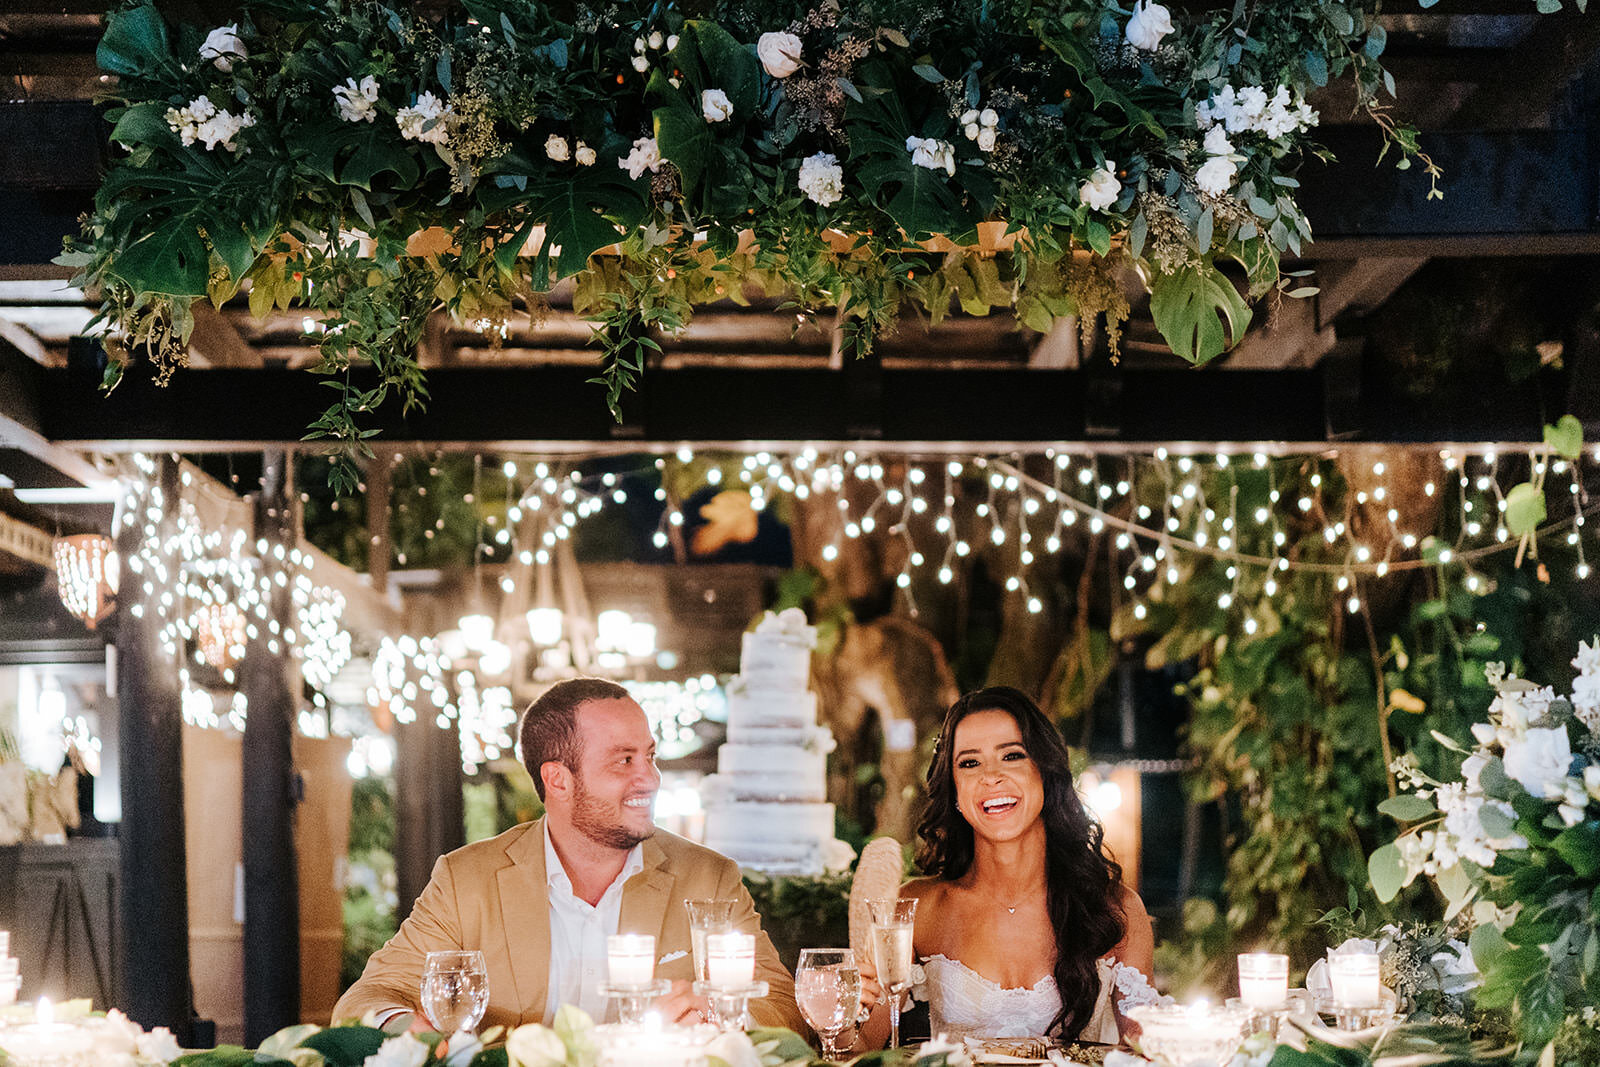 Bride and groom, framed by tropical foliage and wooden arches, smile and look at each other while wedding speech is delivered off-frame during wedding in Puerto Rican Mountain Hacienda